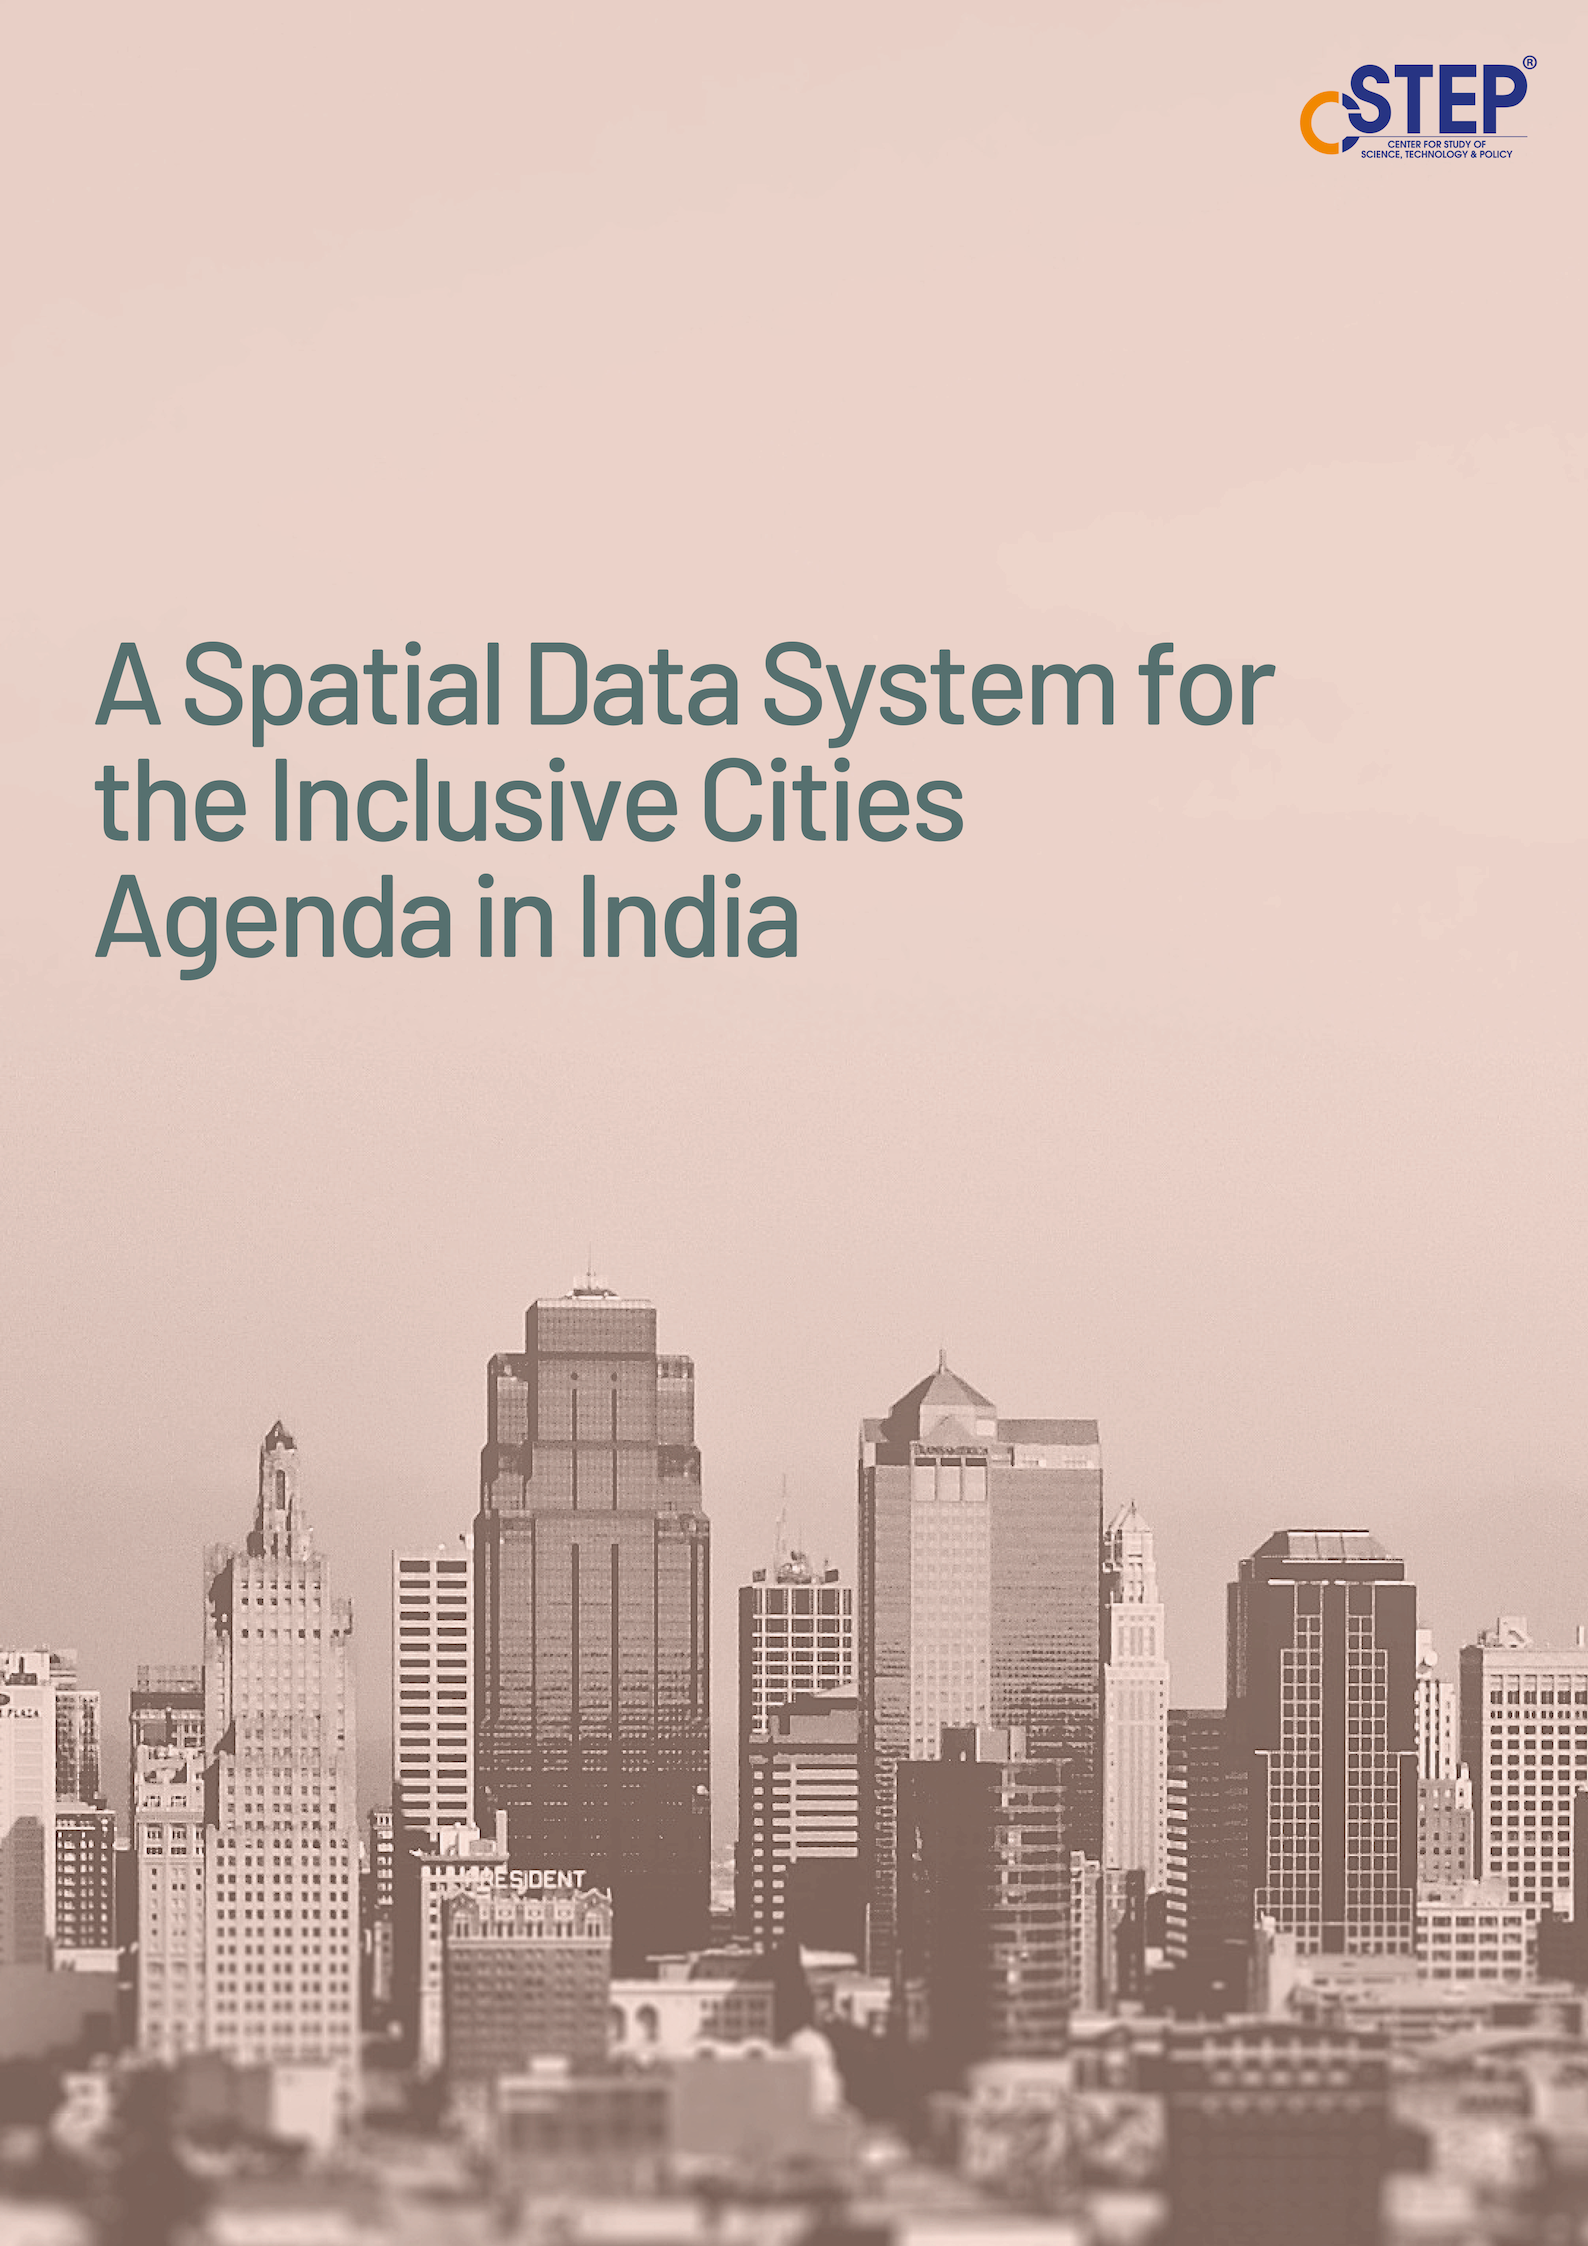 A Spatial Data System for the Inclusive Cities Agenda